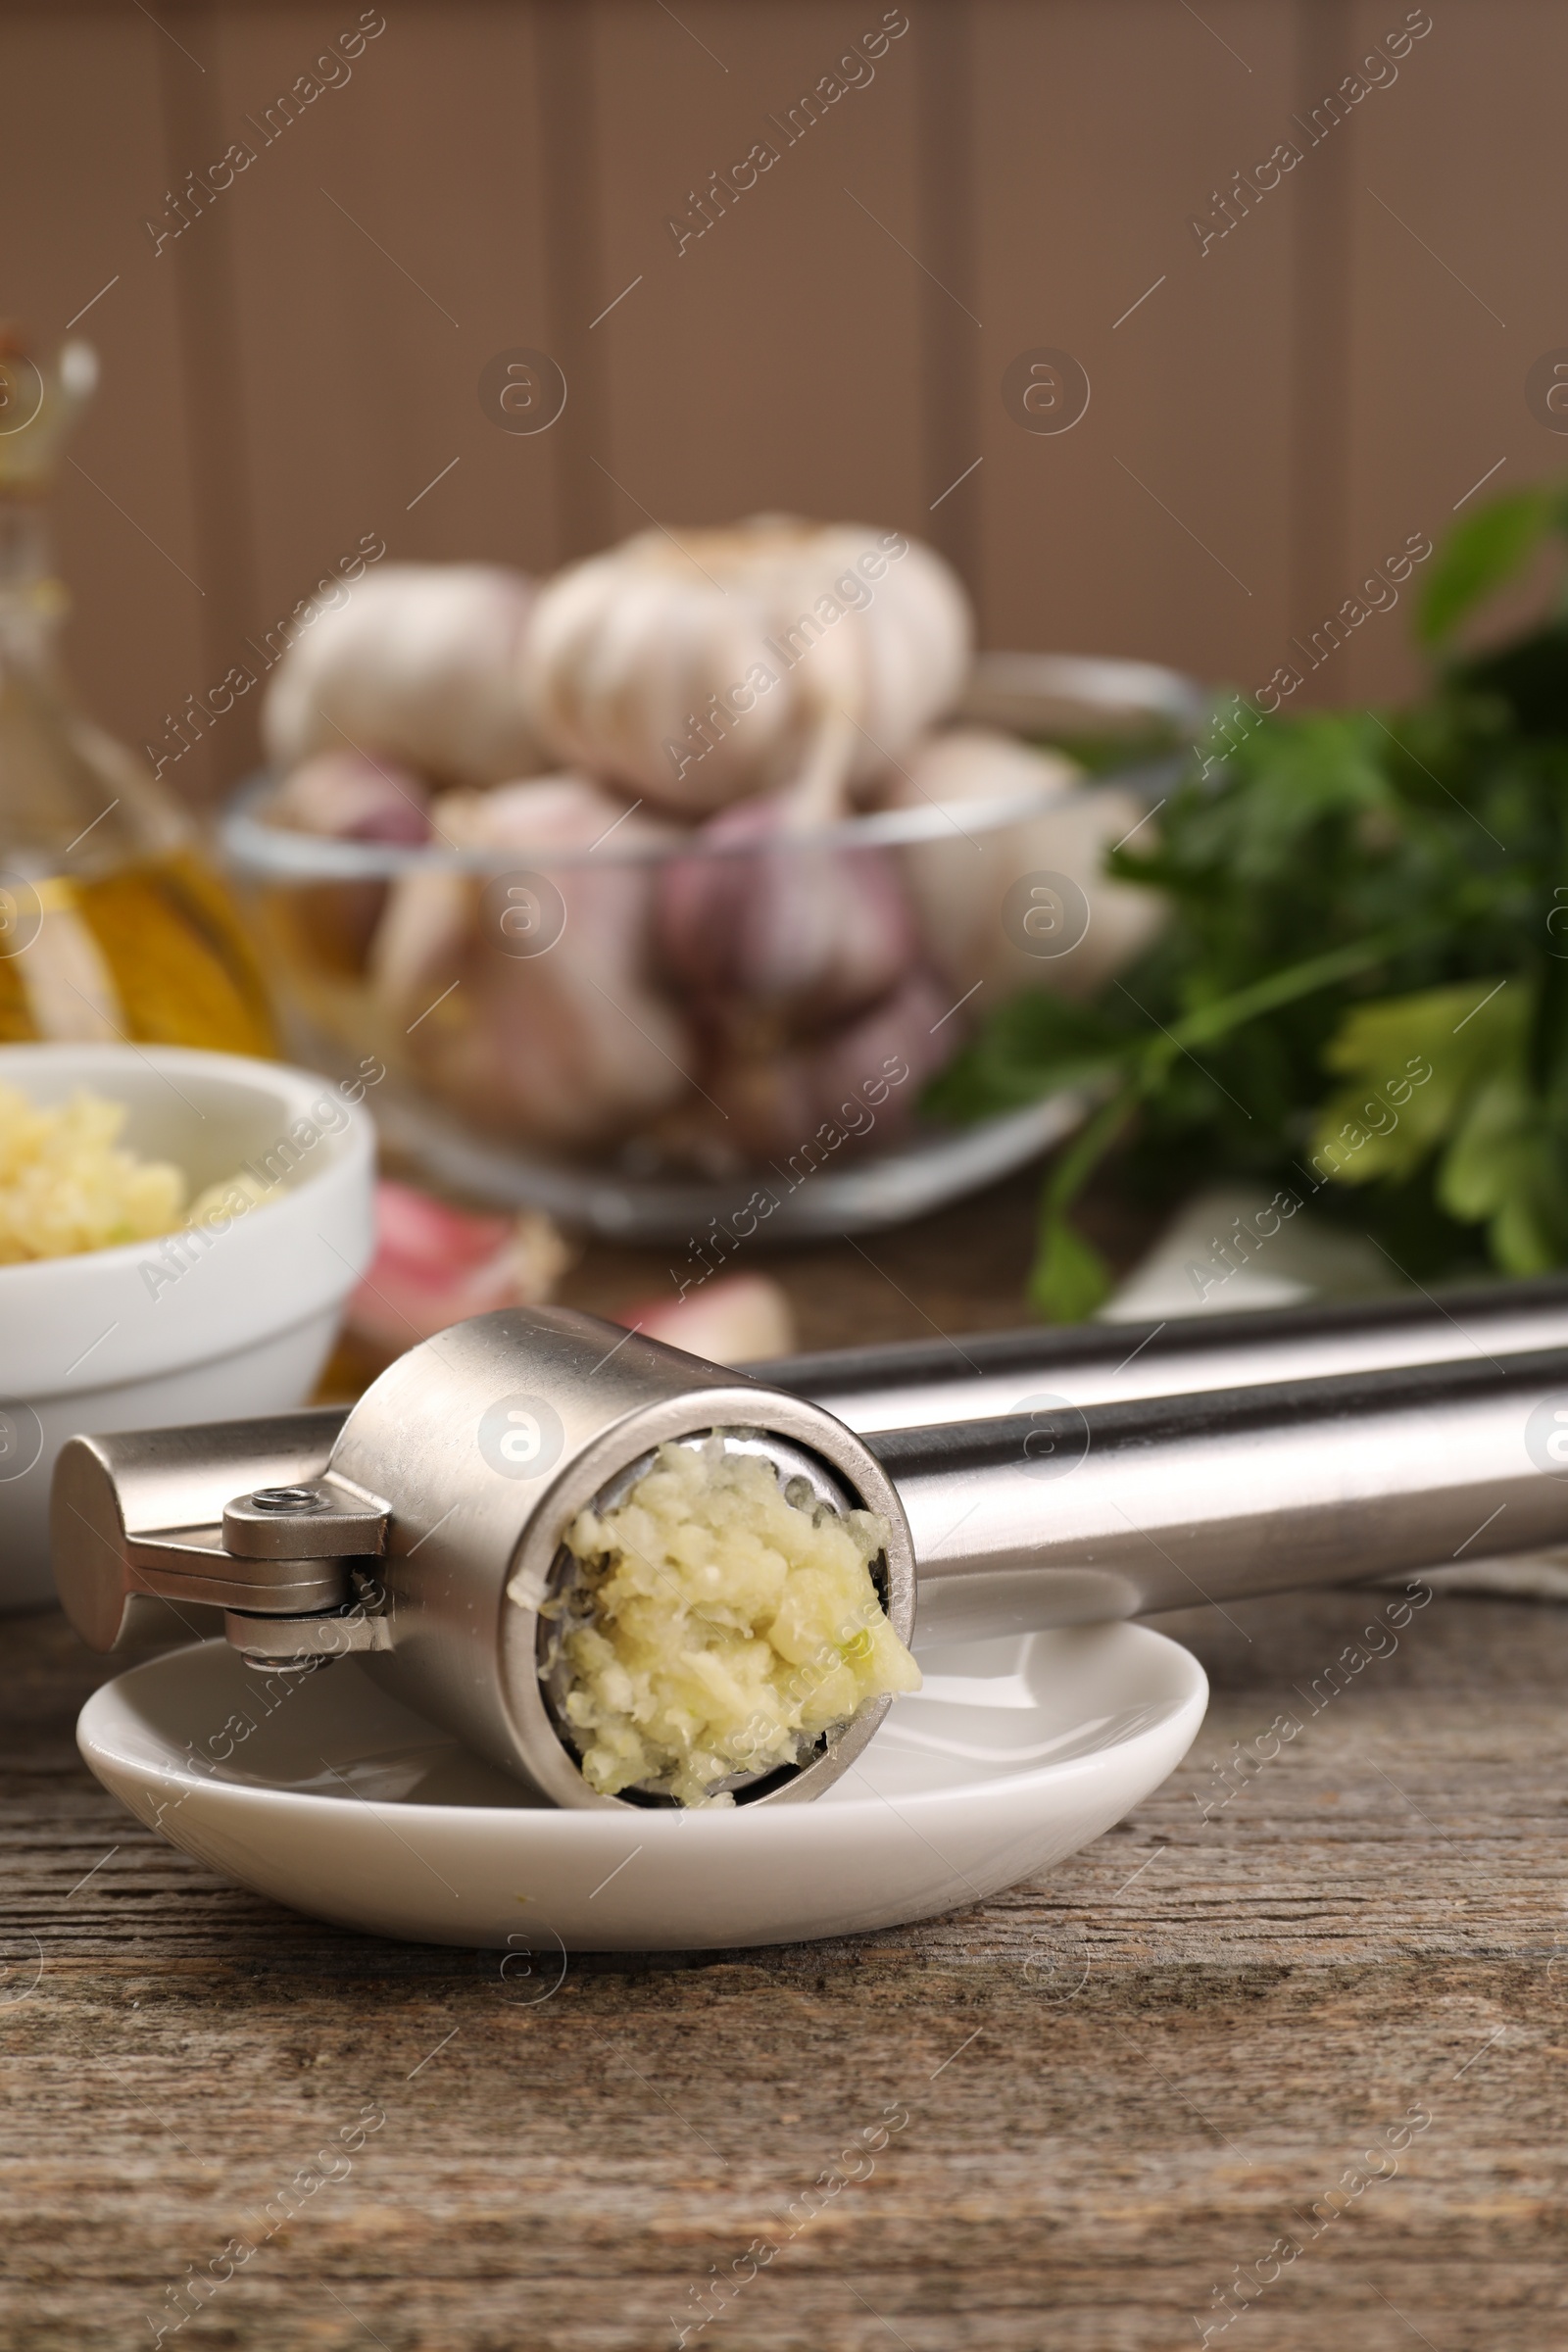 Photo of Garlic press with mince on wooden table, closeup